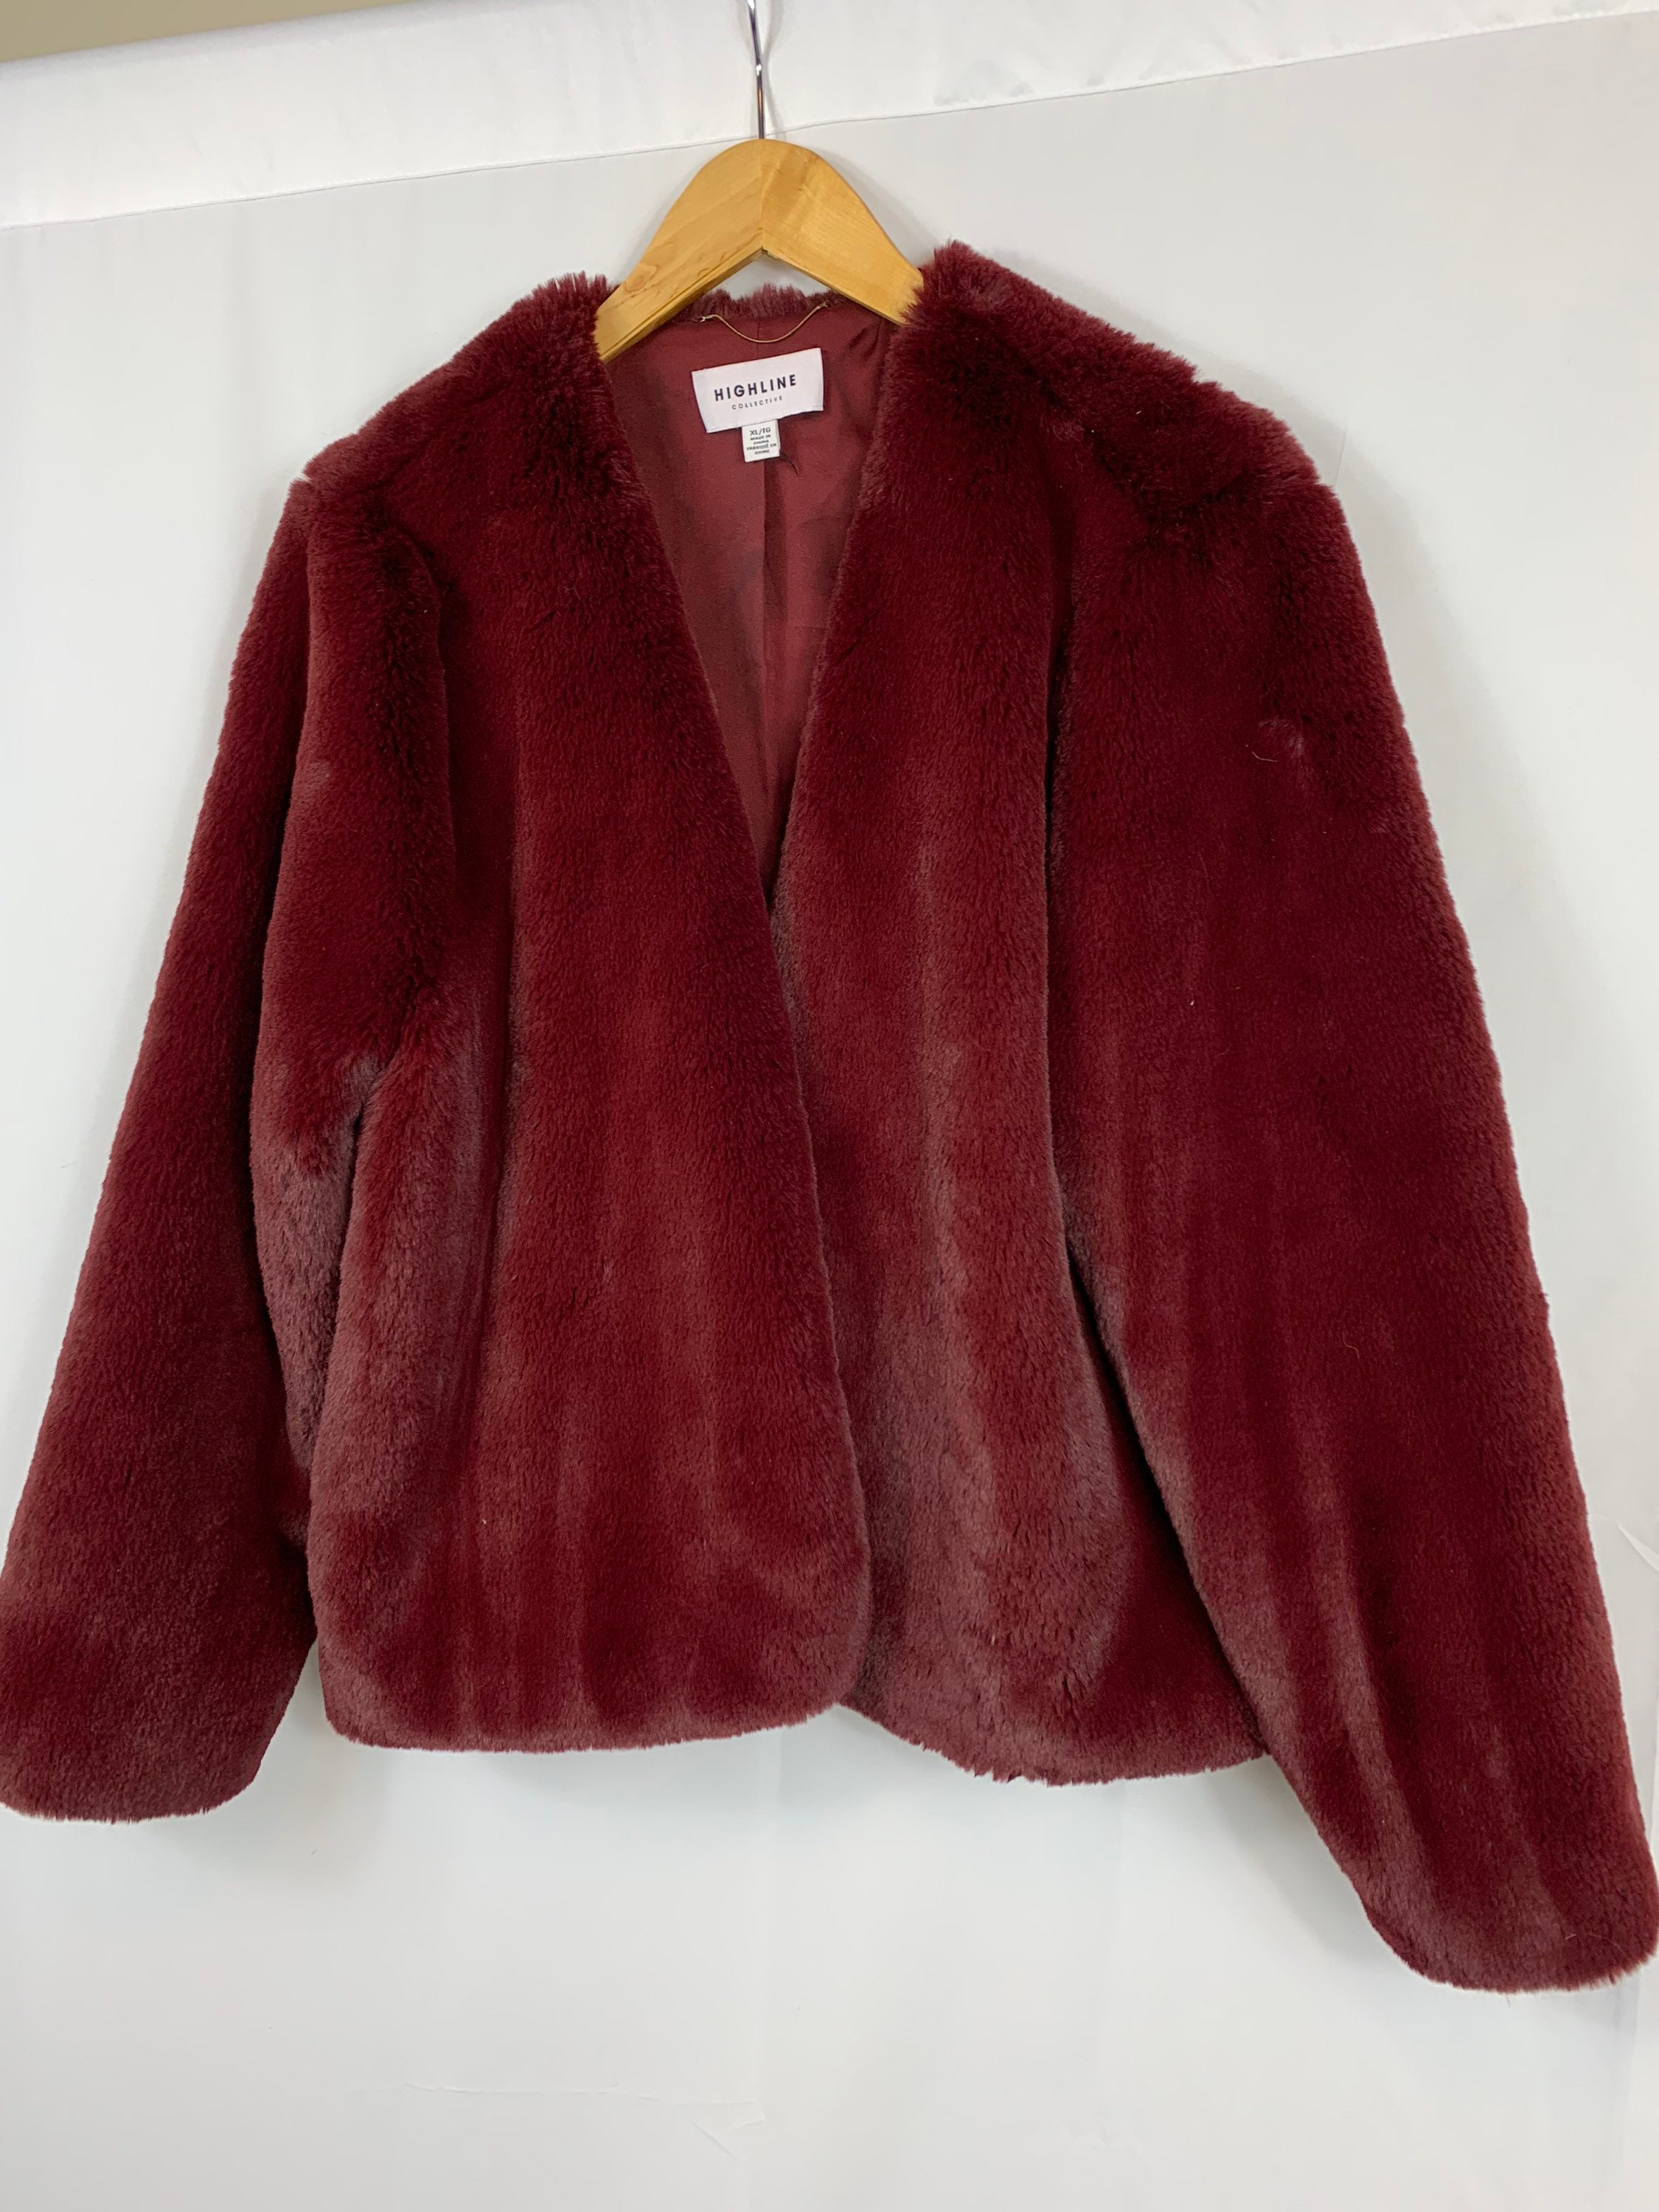 Pre-Owned Natural Demi Buff / Ranch Mink 2 Tone Bomber Jacket - Madison  Avenue Furs & Henry Cowit, Inc.